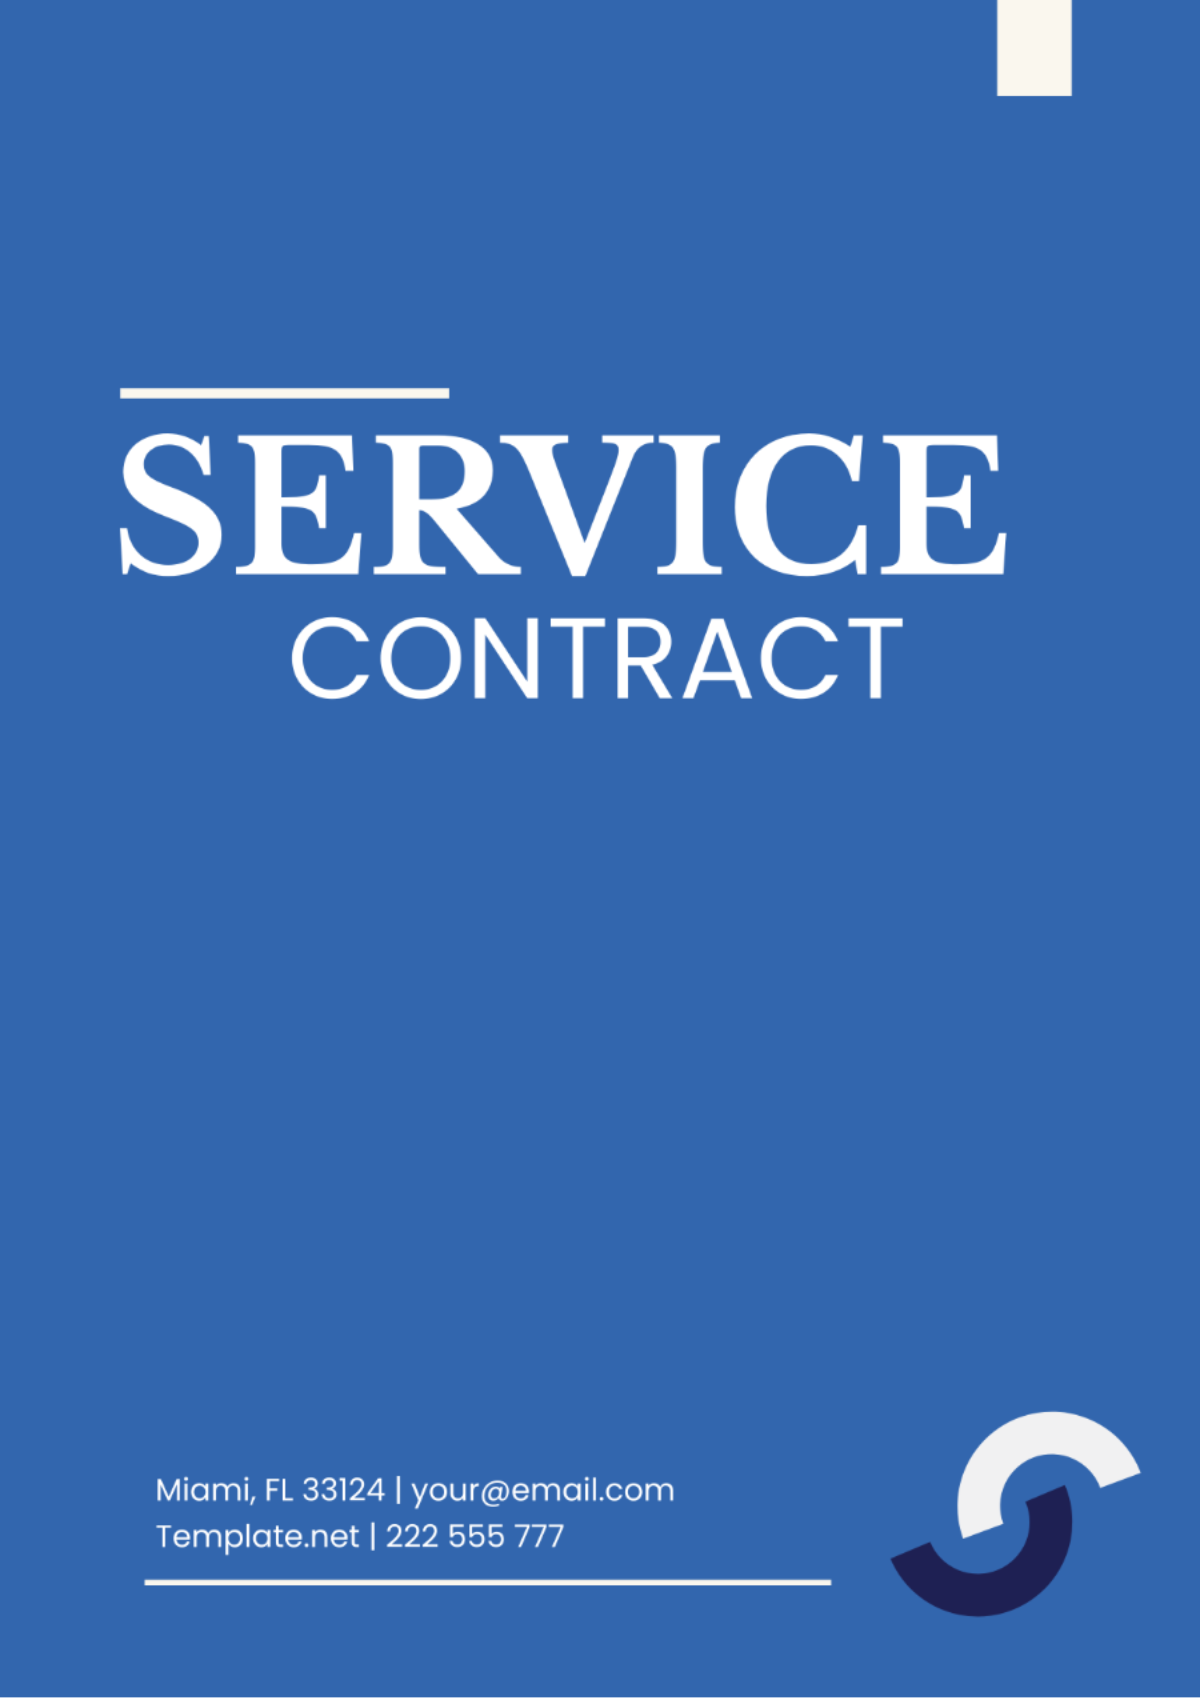 Services Contract Template